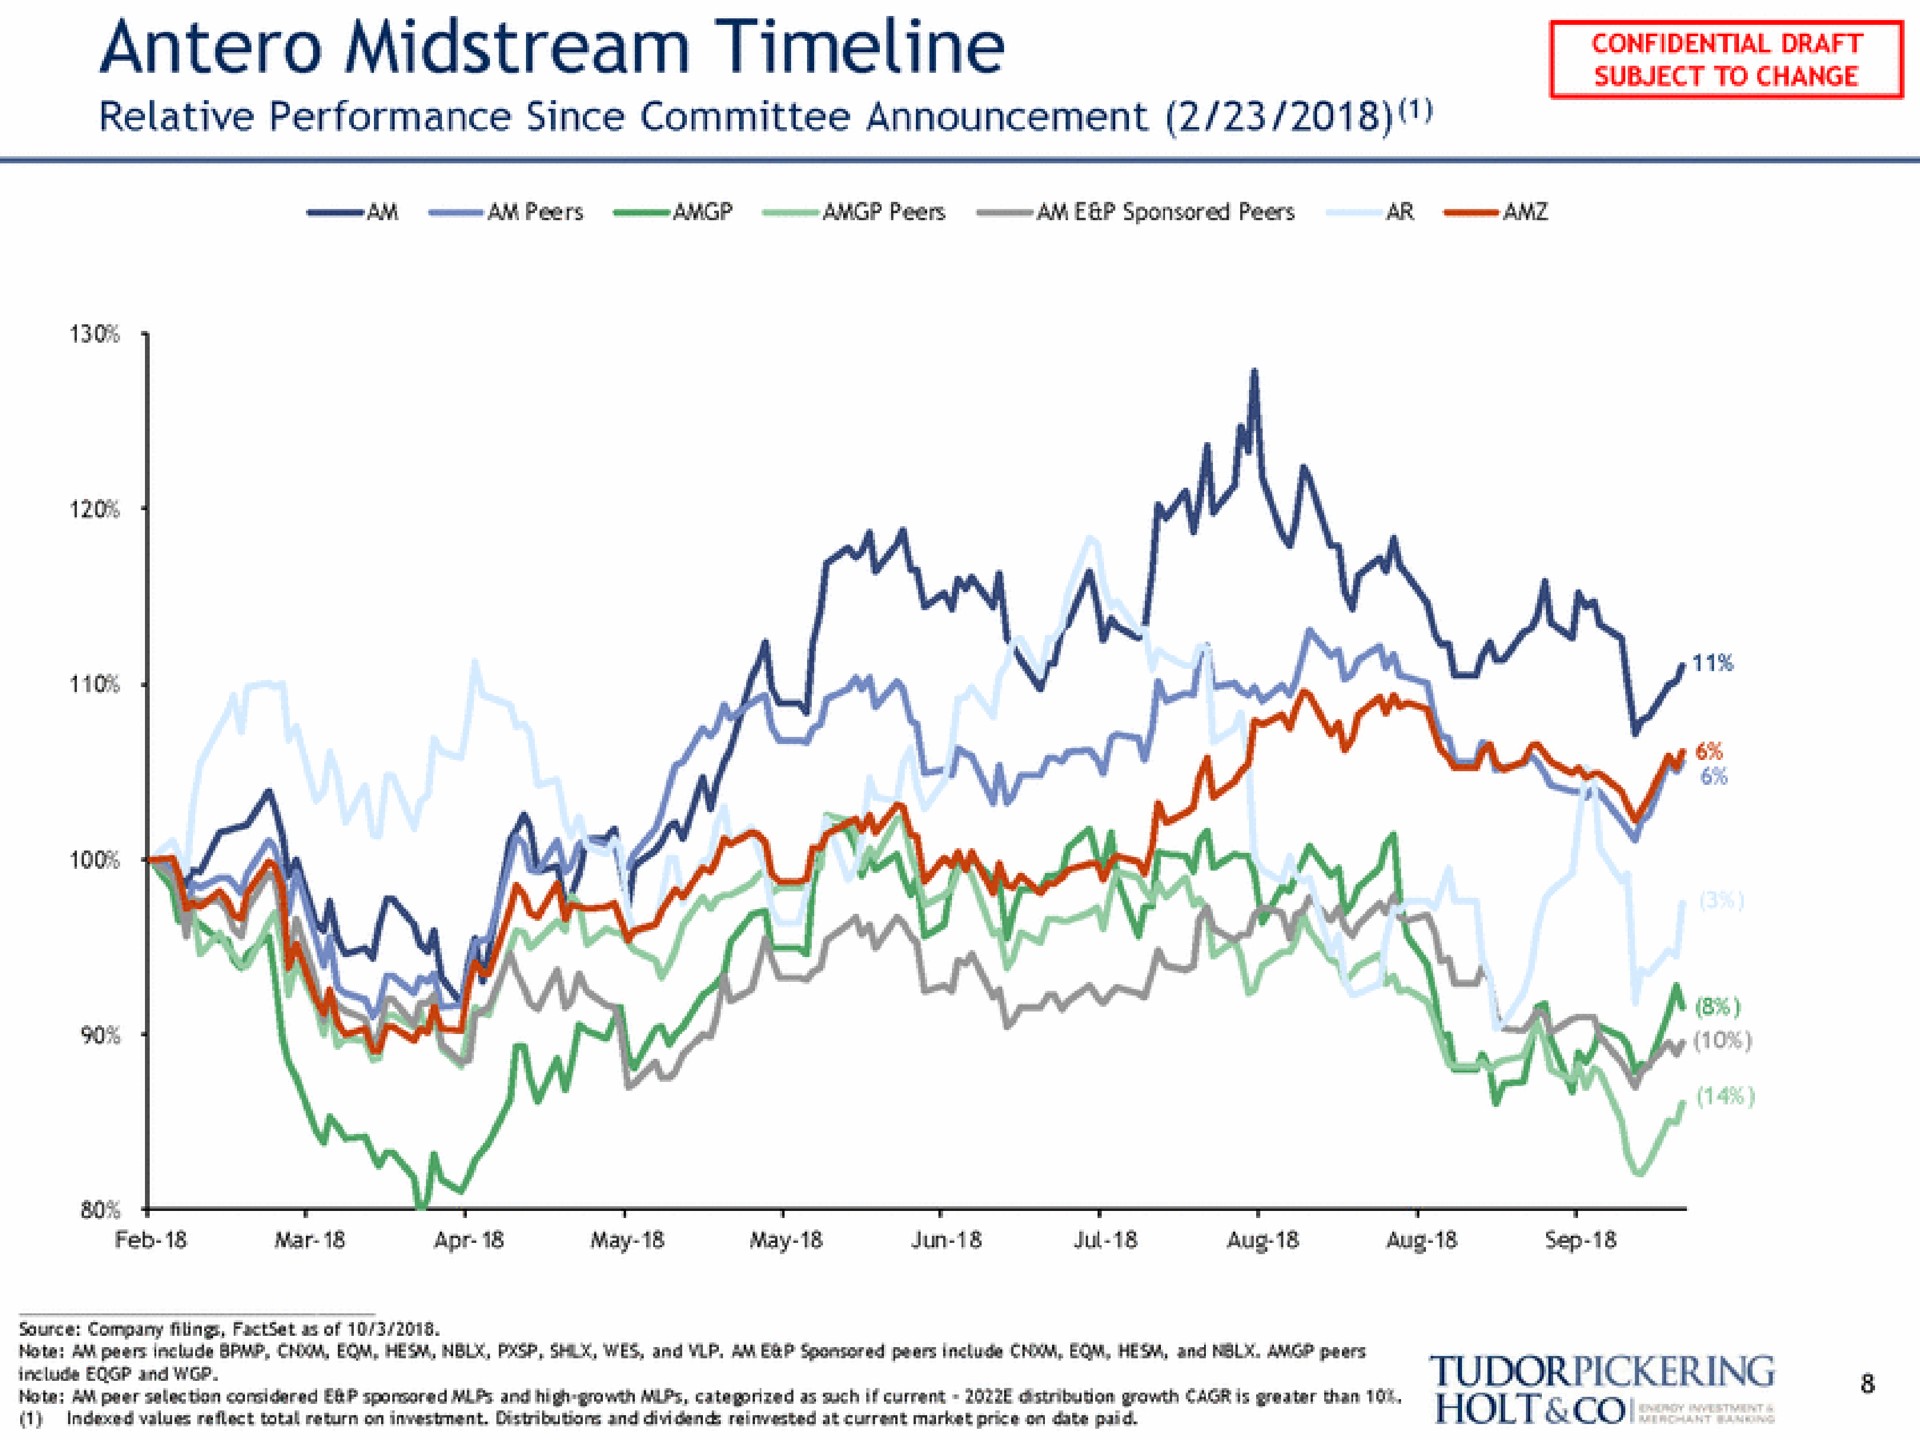 midstream relative performance since committee announcement include and wop | Tudor, Pickering, Holt & Co